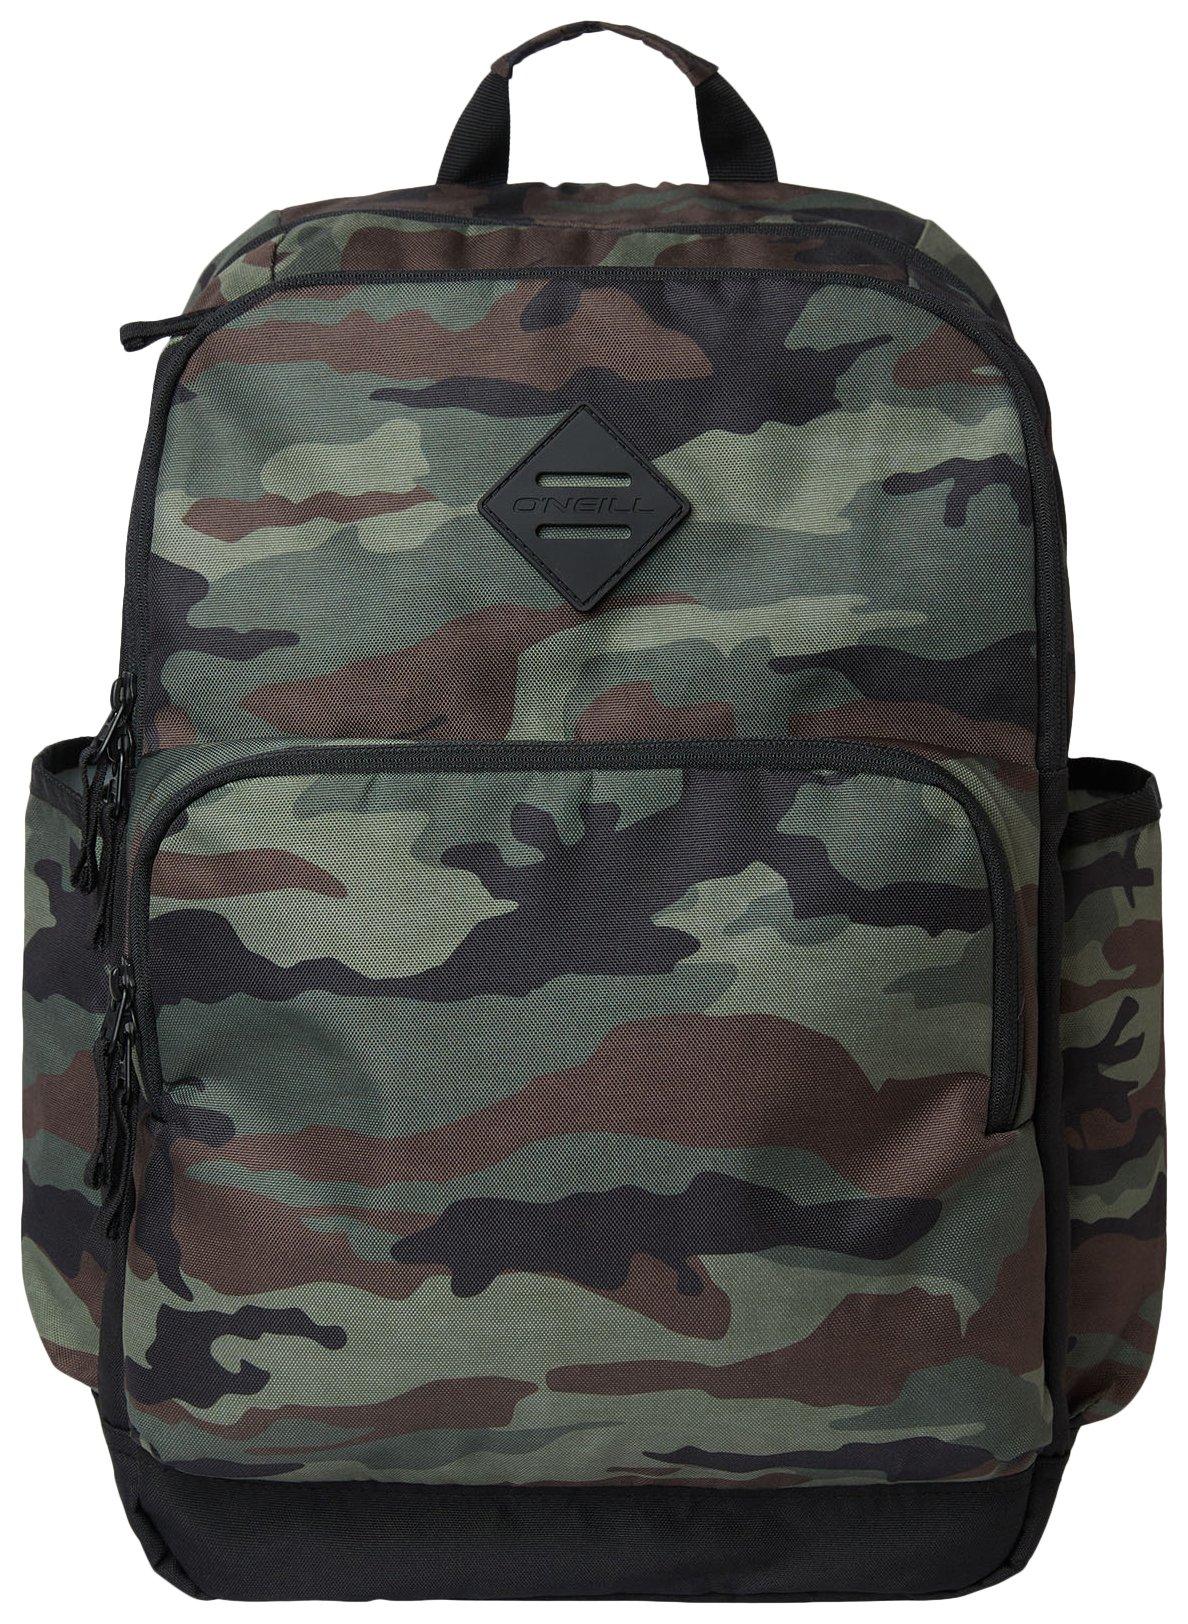 O'Neill Camouflage Poly Canvas School Bag Backpack